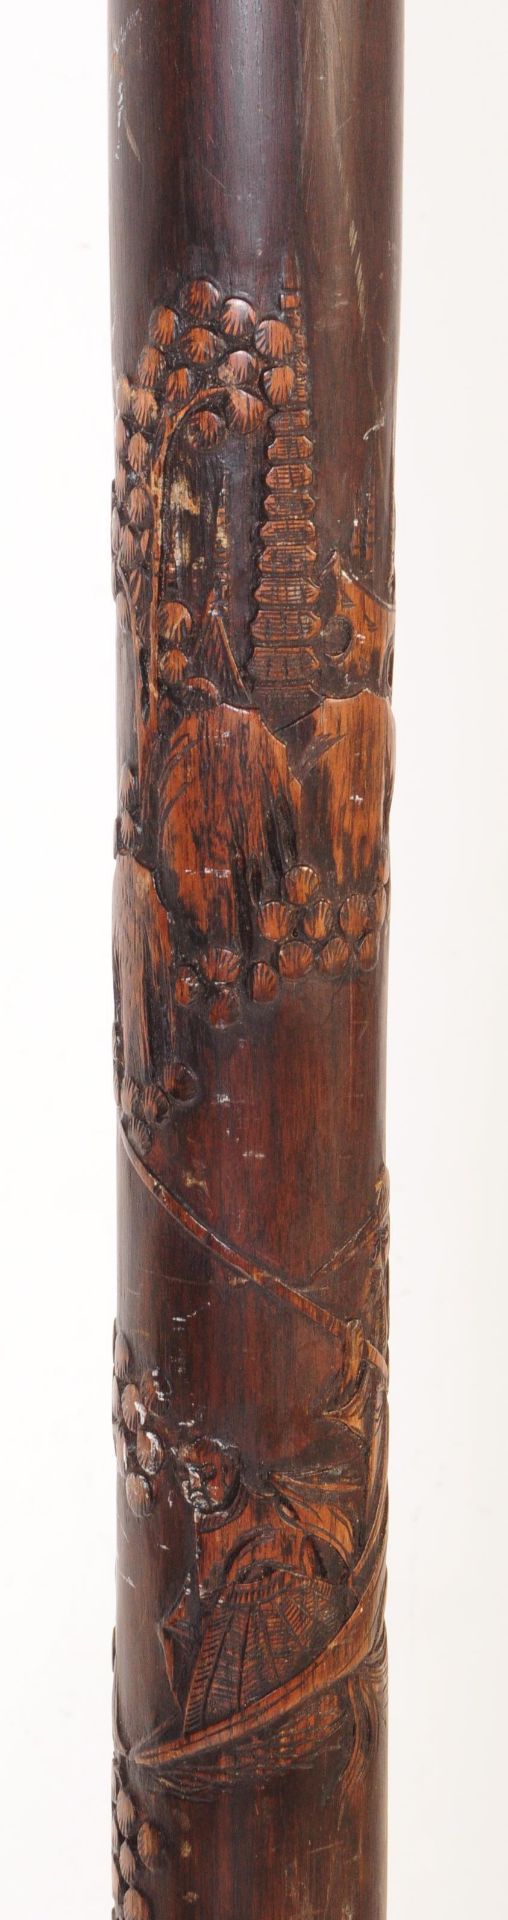 20TH CENTURY CHINESE CARVED HARDWOOD STANDARD LAMP - Image 2 of 4